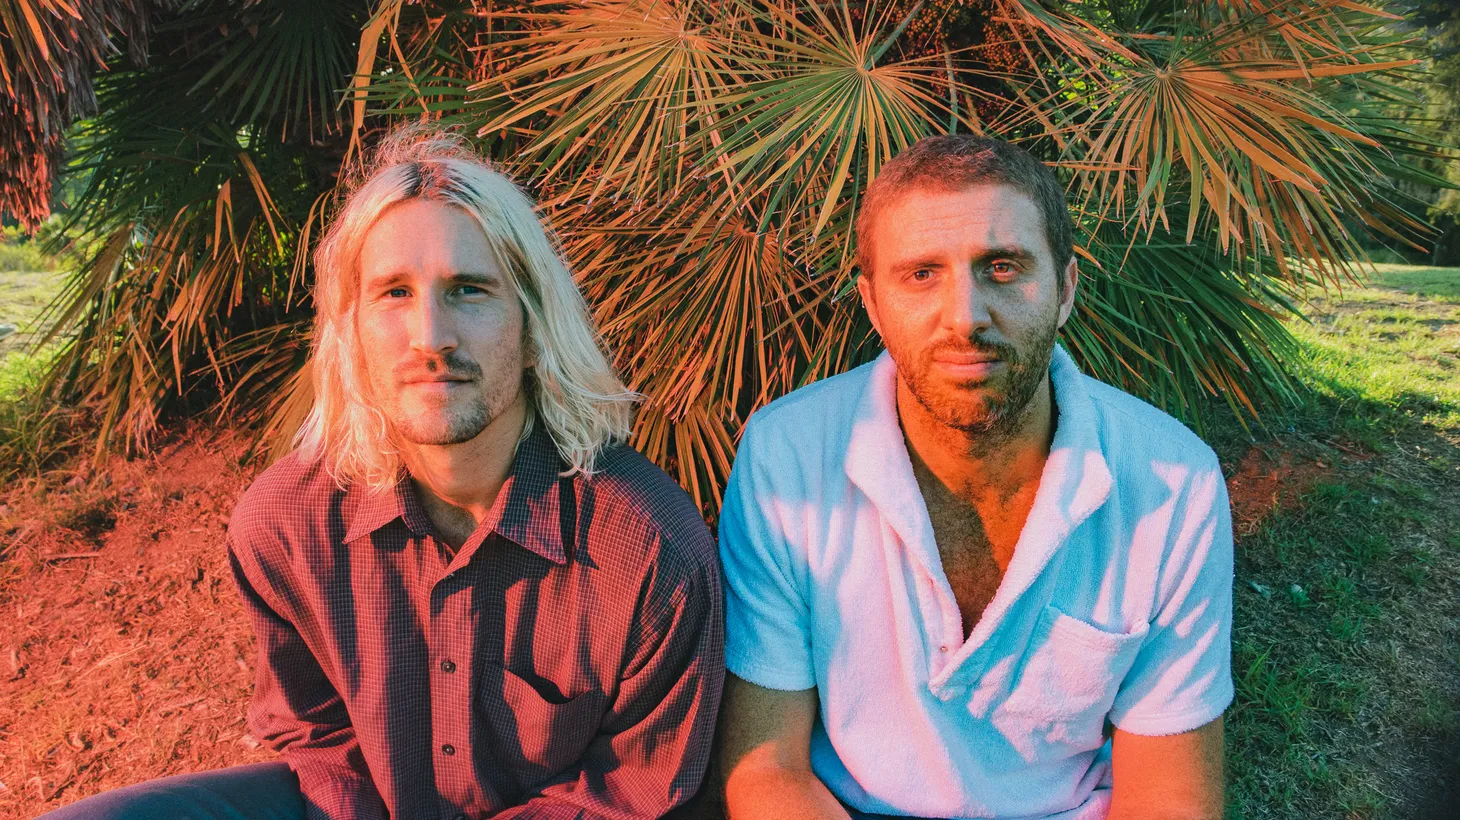 LA duo NEIL FRANCES close out a year full of KCRW chart glory as 2022’s final number one artist.